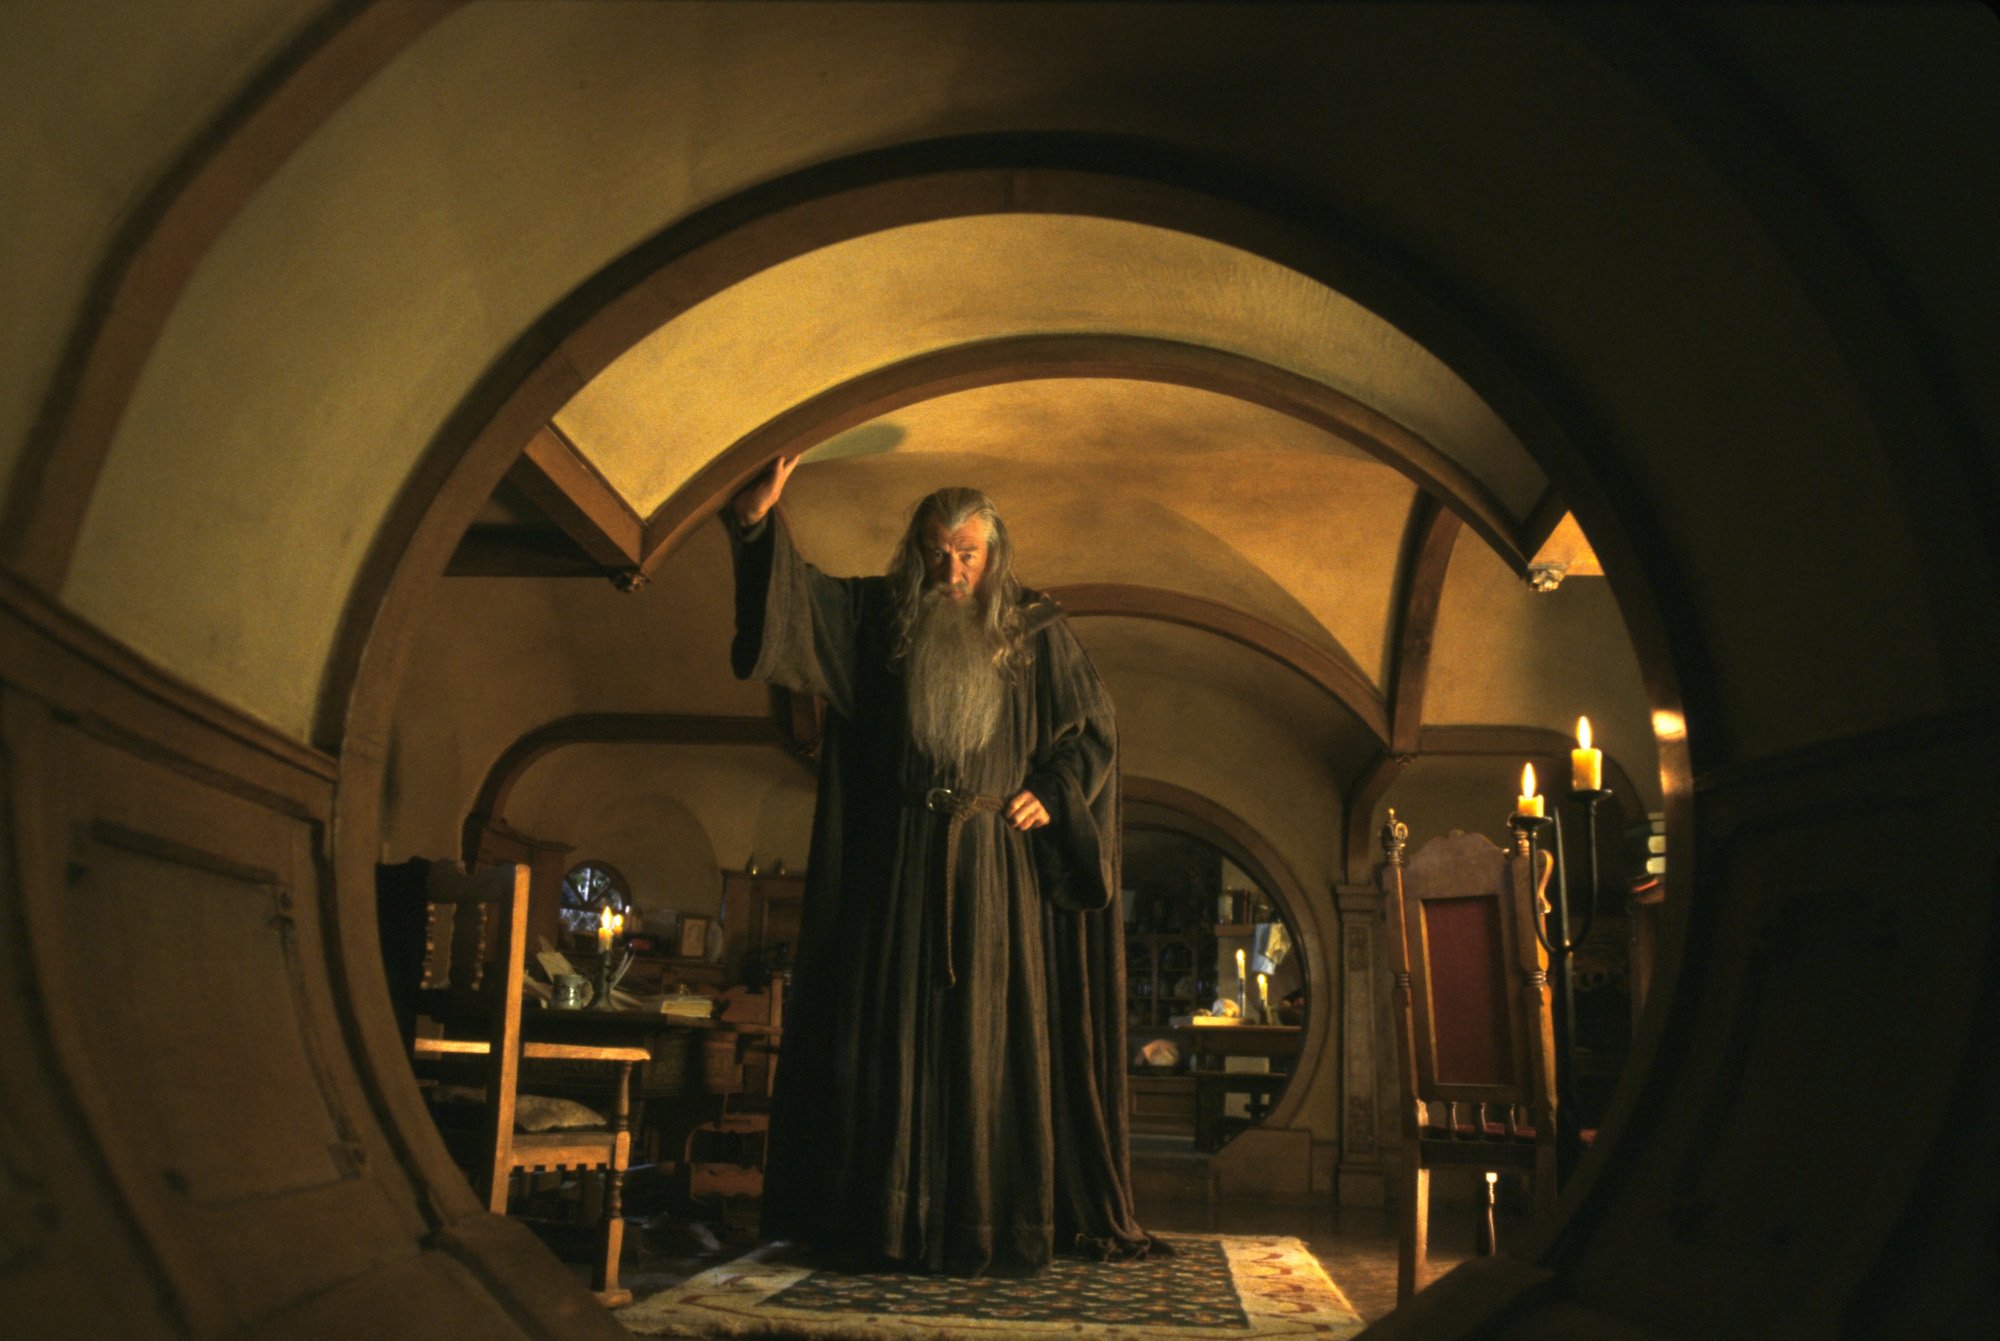 Sir Ian McKellen as Gandalf in 'The Lord of the Rings' for our article about when he came to Middle-earth. He's standing in a Hobbit house and touching the ceiling.